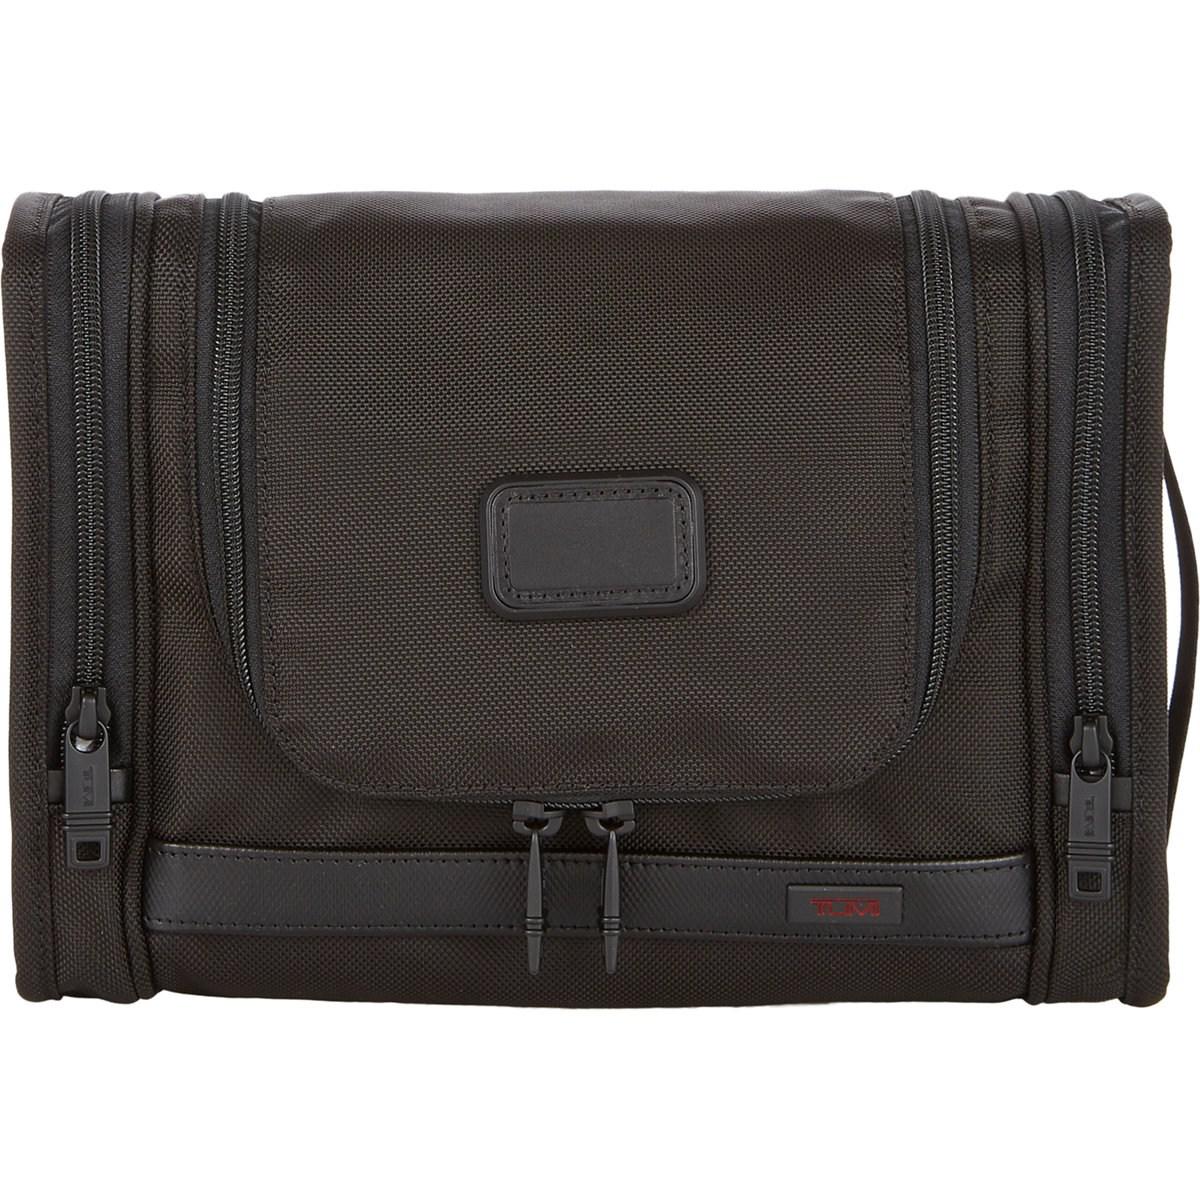 Tumi Alpha Ii Hanging Toiletry Case in Black for Men - Lyst